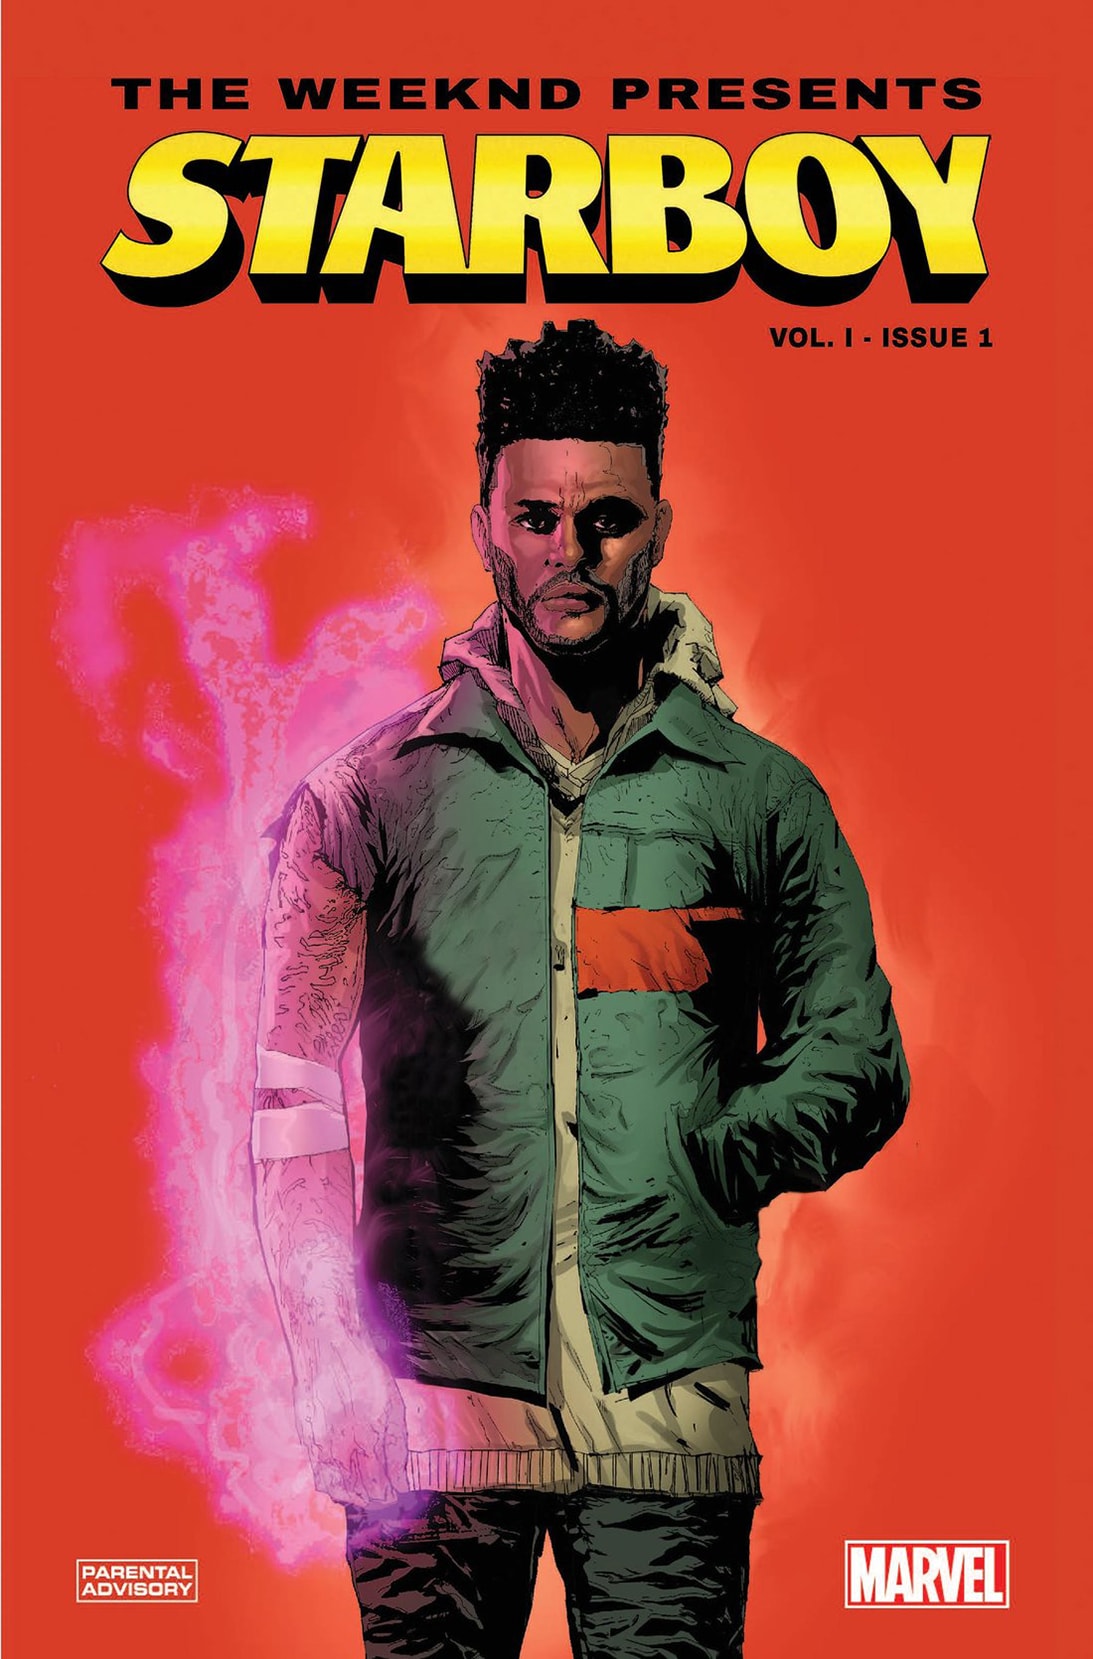 The Weeknd Starboy Marvel Comic inside preview june 13 release april 19 2018 debut launch exclusive abel tesfaye